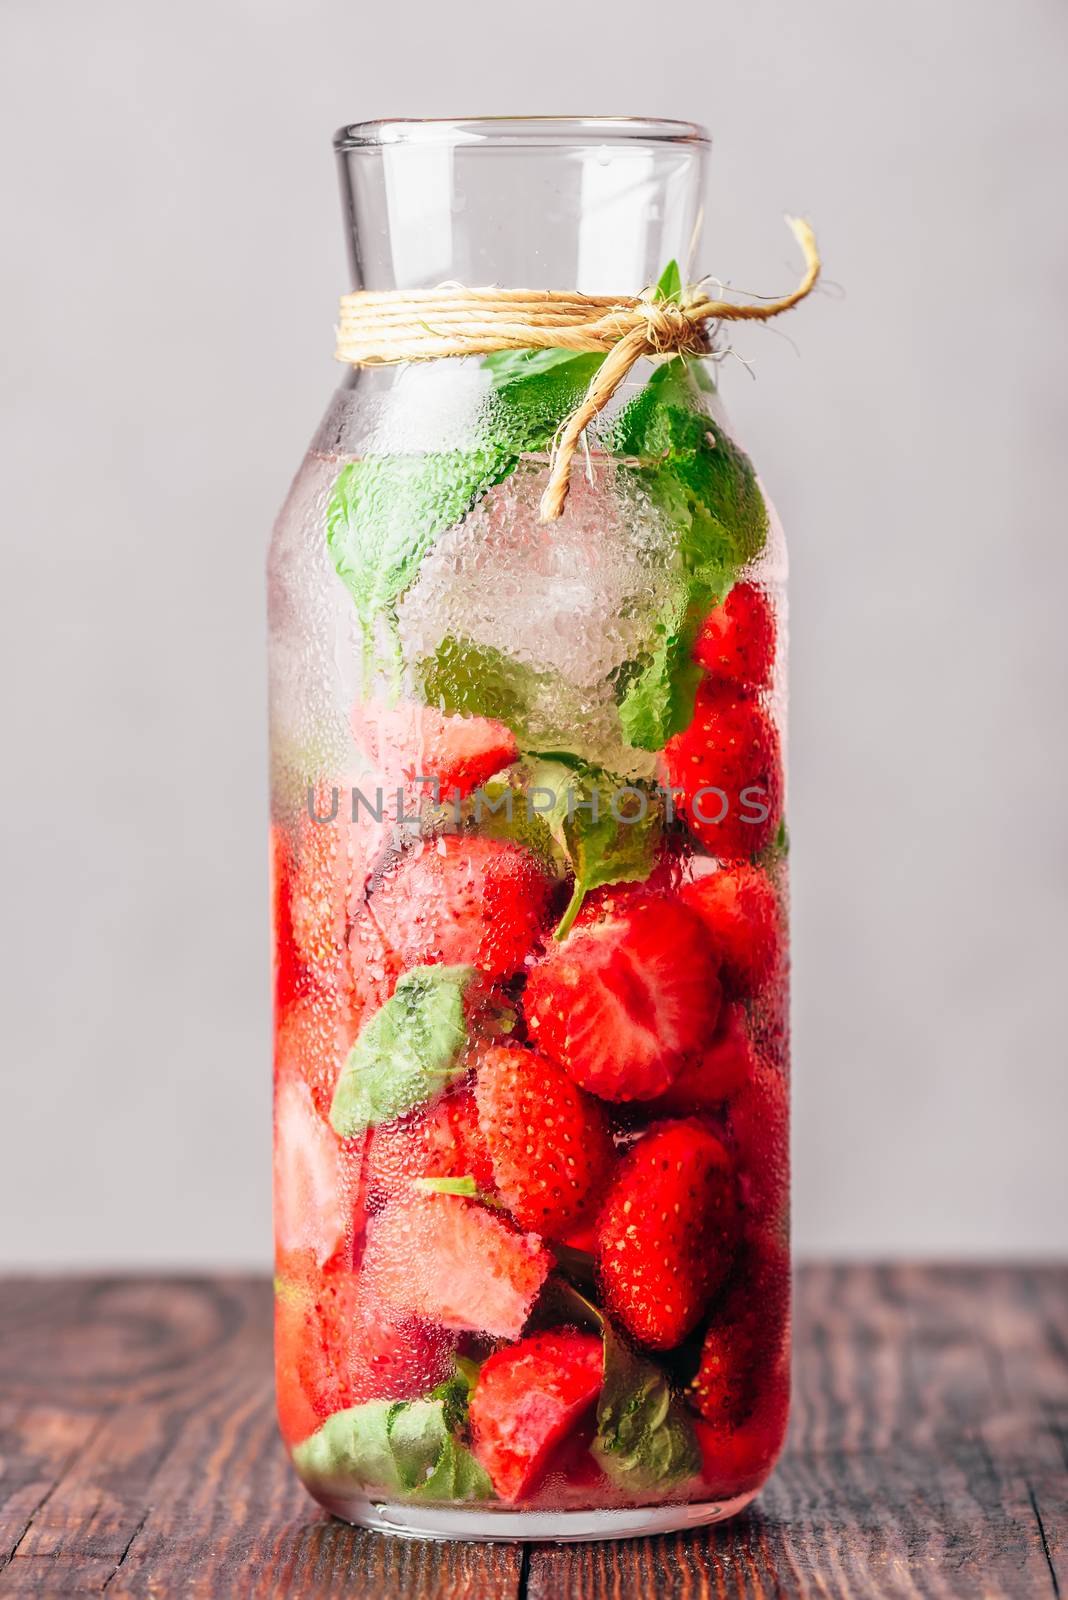 Water Infused with Strawberry and Basil. by Seva_blsv